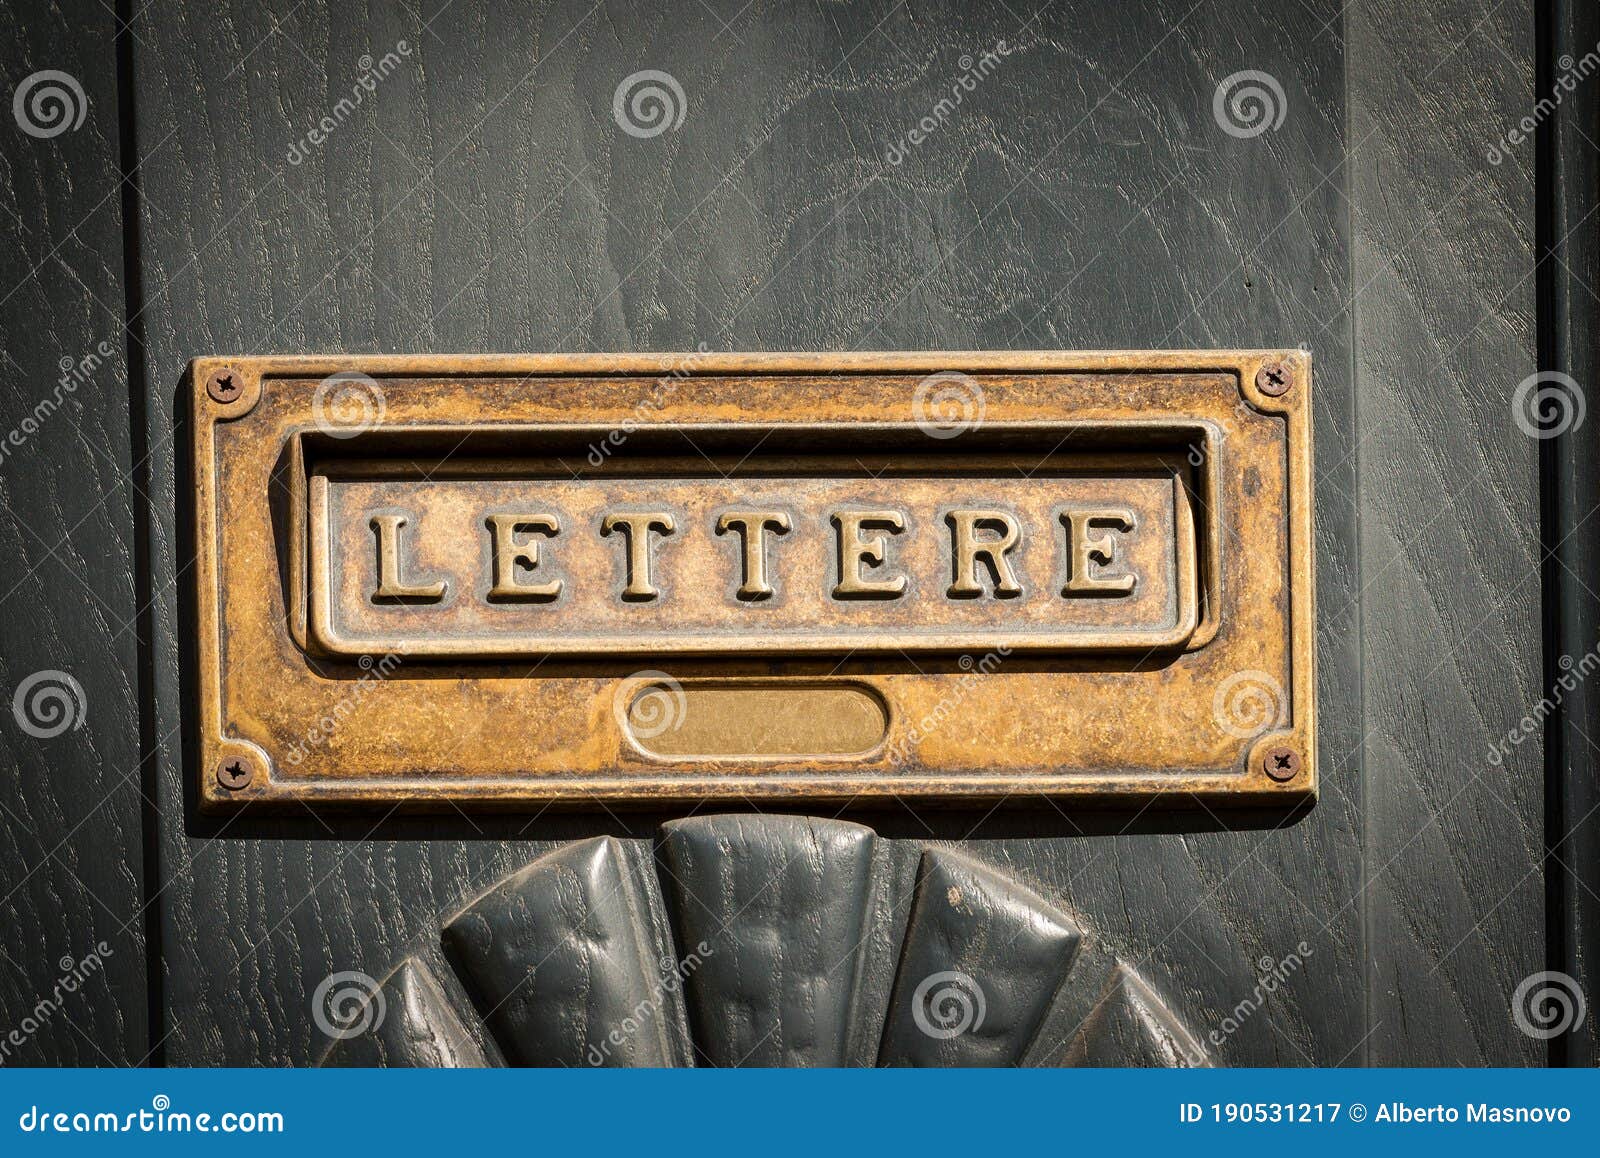 brass letterbox with italian text lettere - front door